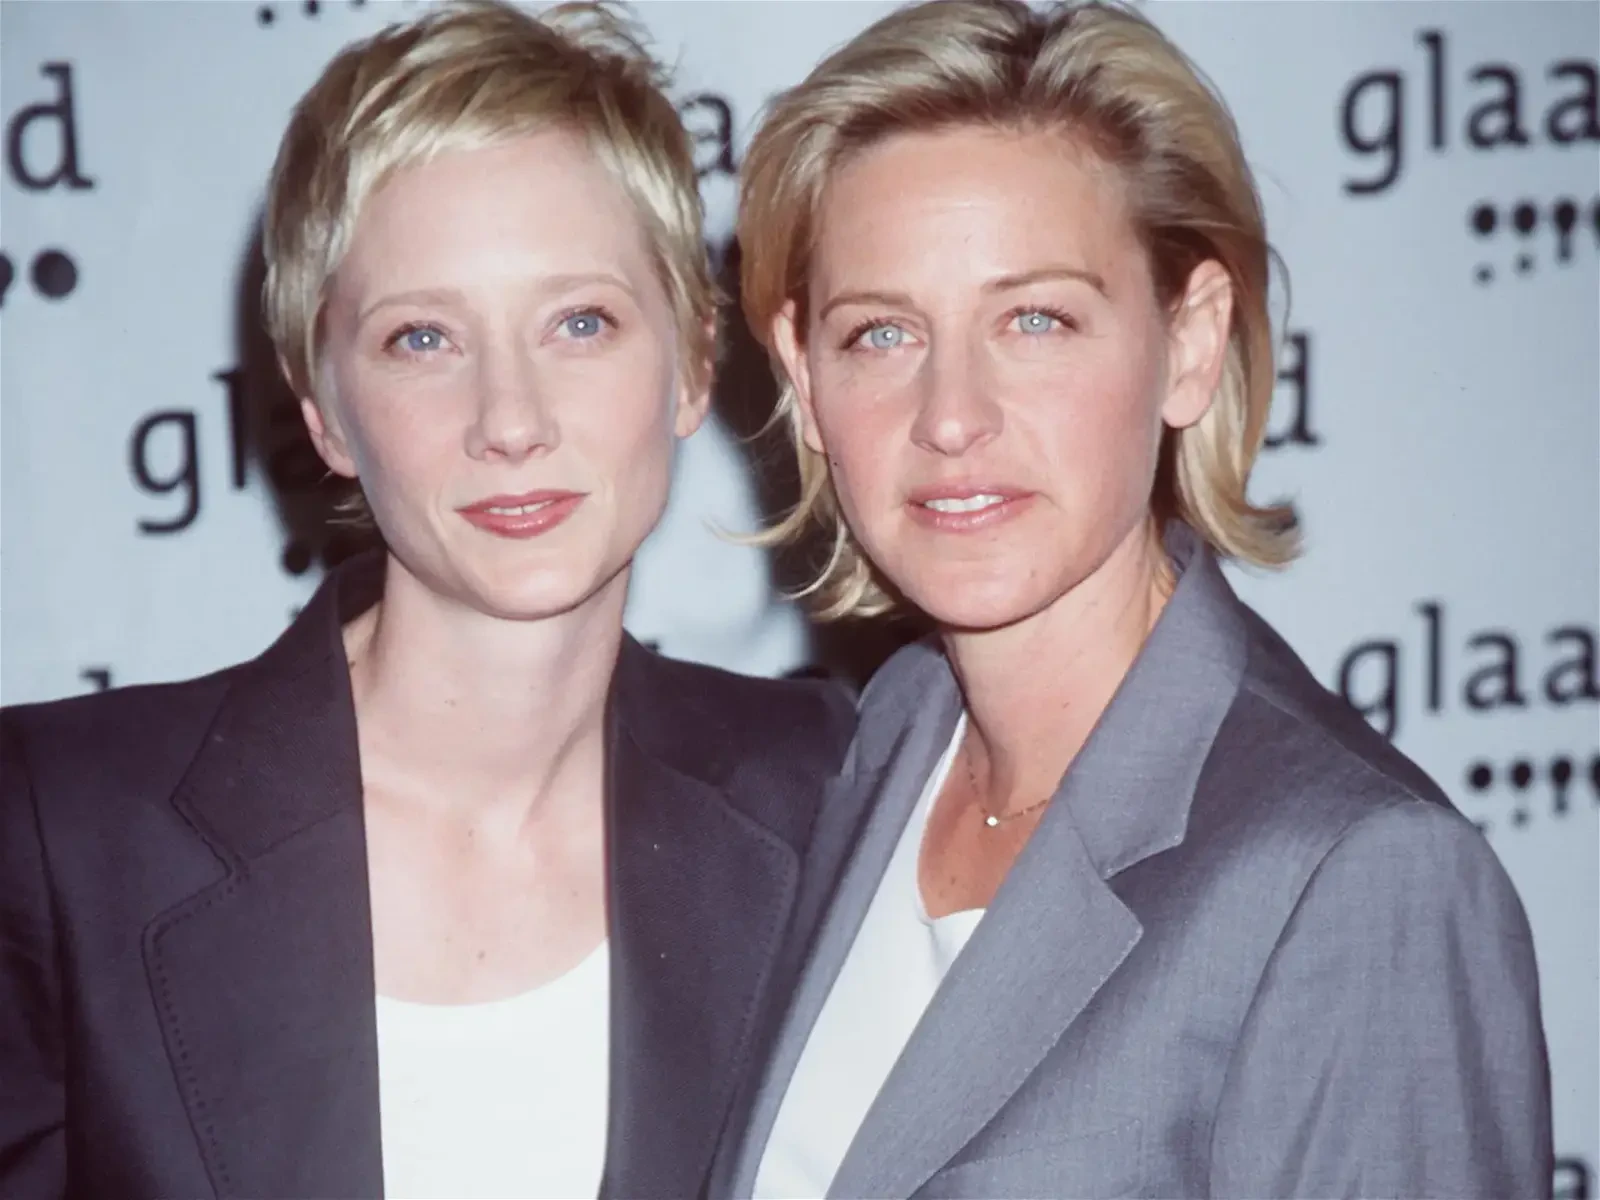 Heche lost out on roles due to her relationship with DeGeneres